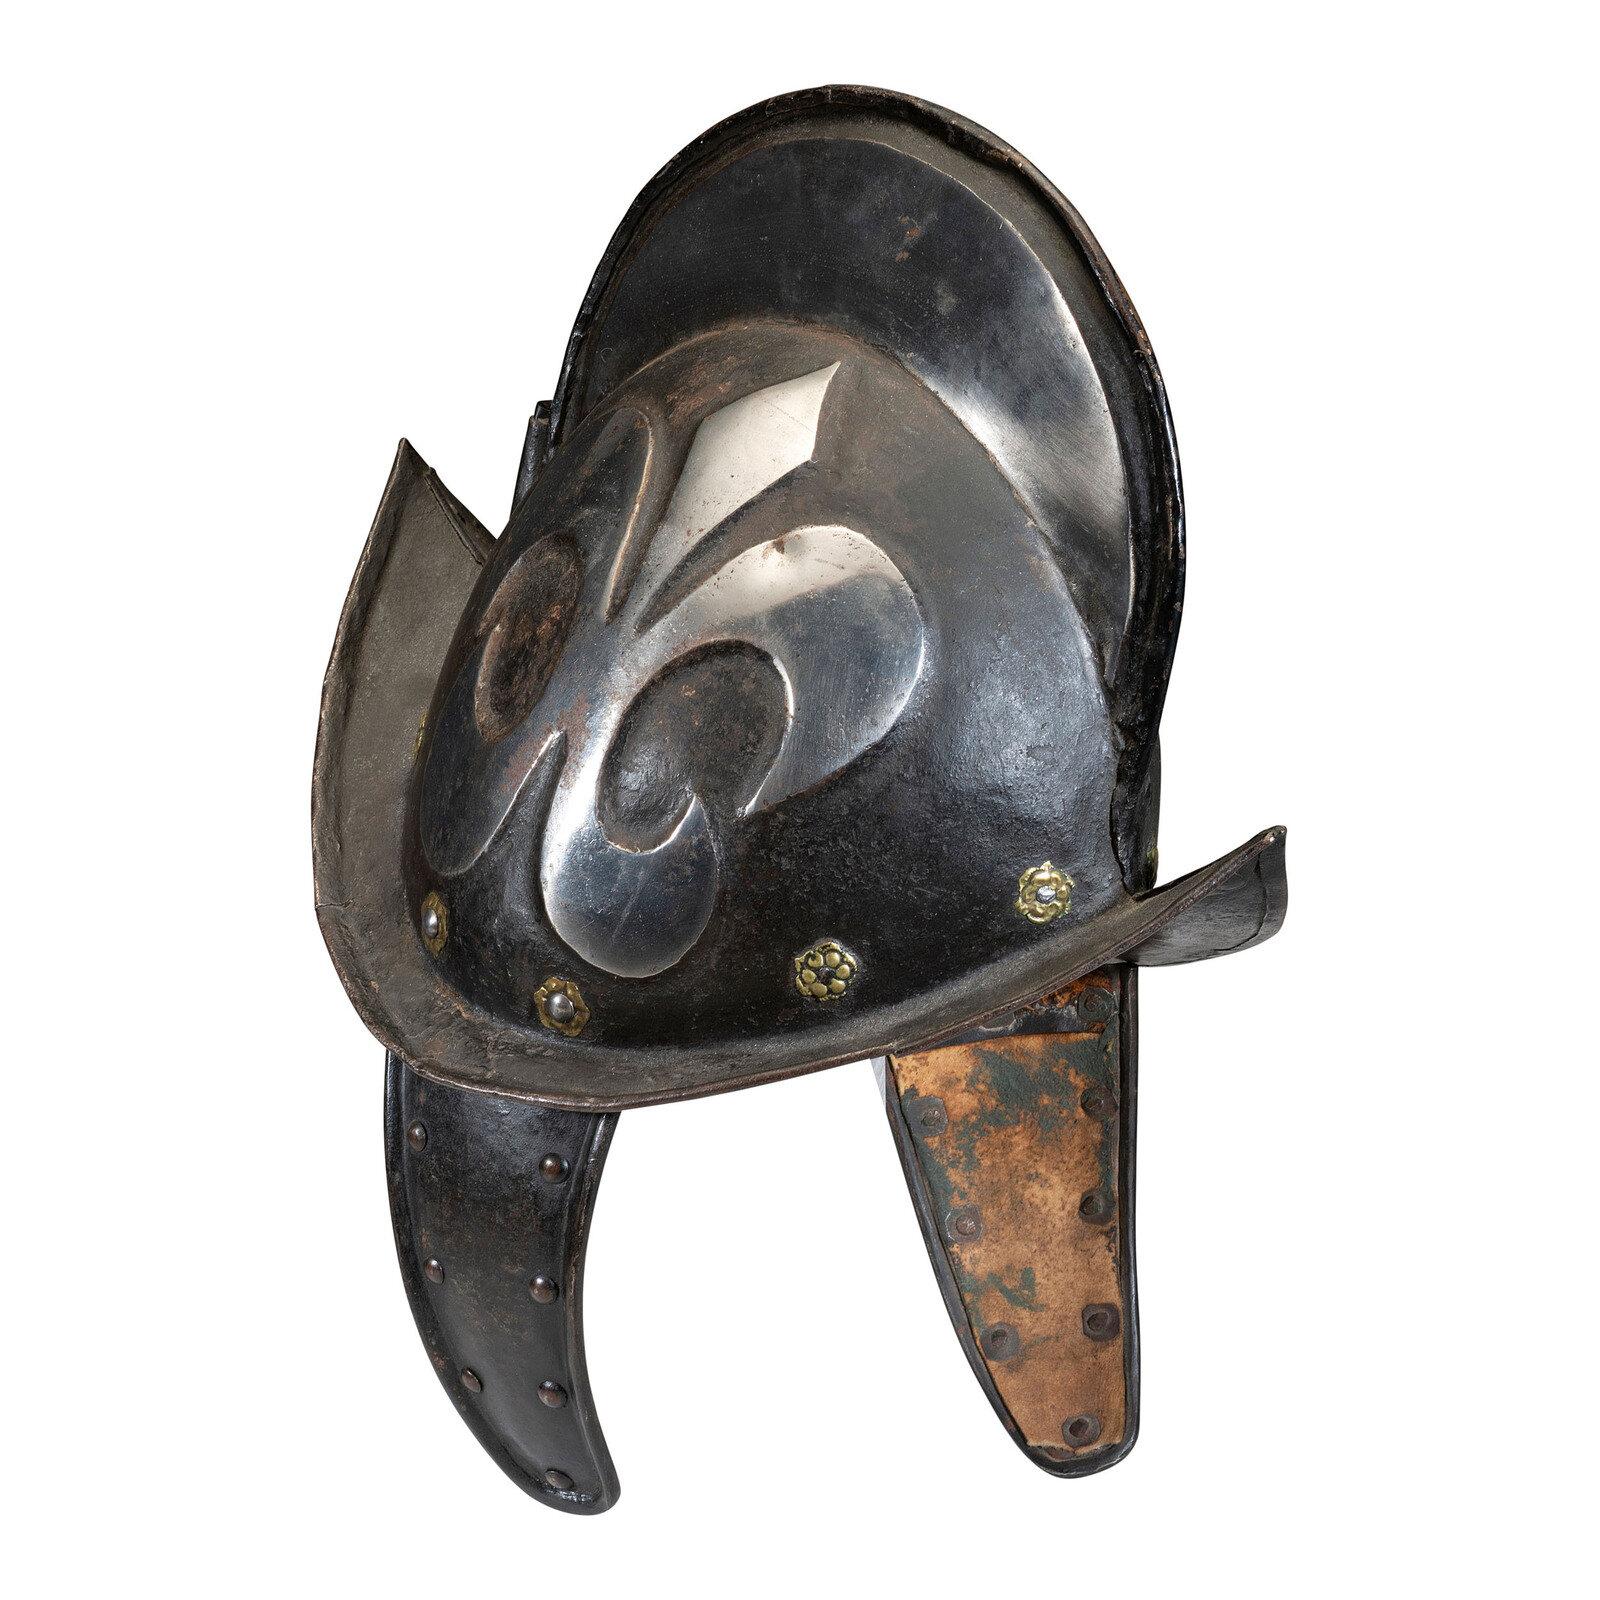 A German Black and White Comb Morian Helmet with Ear Flaps